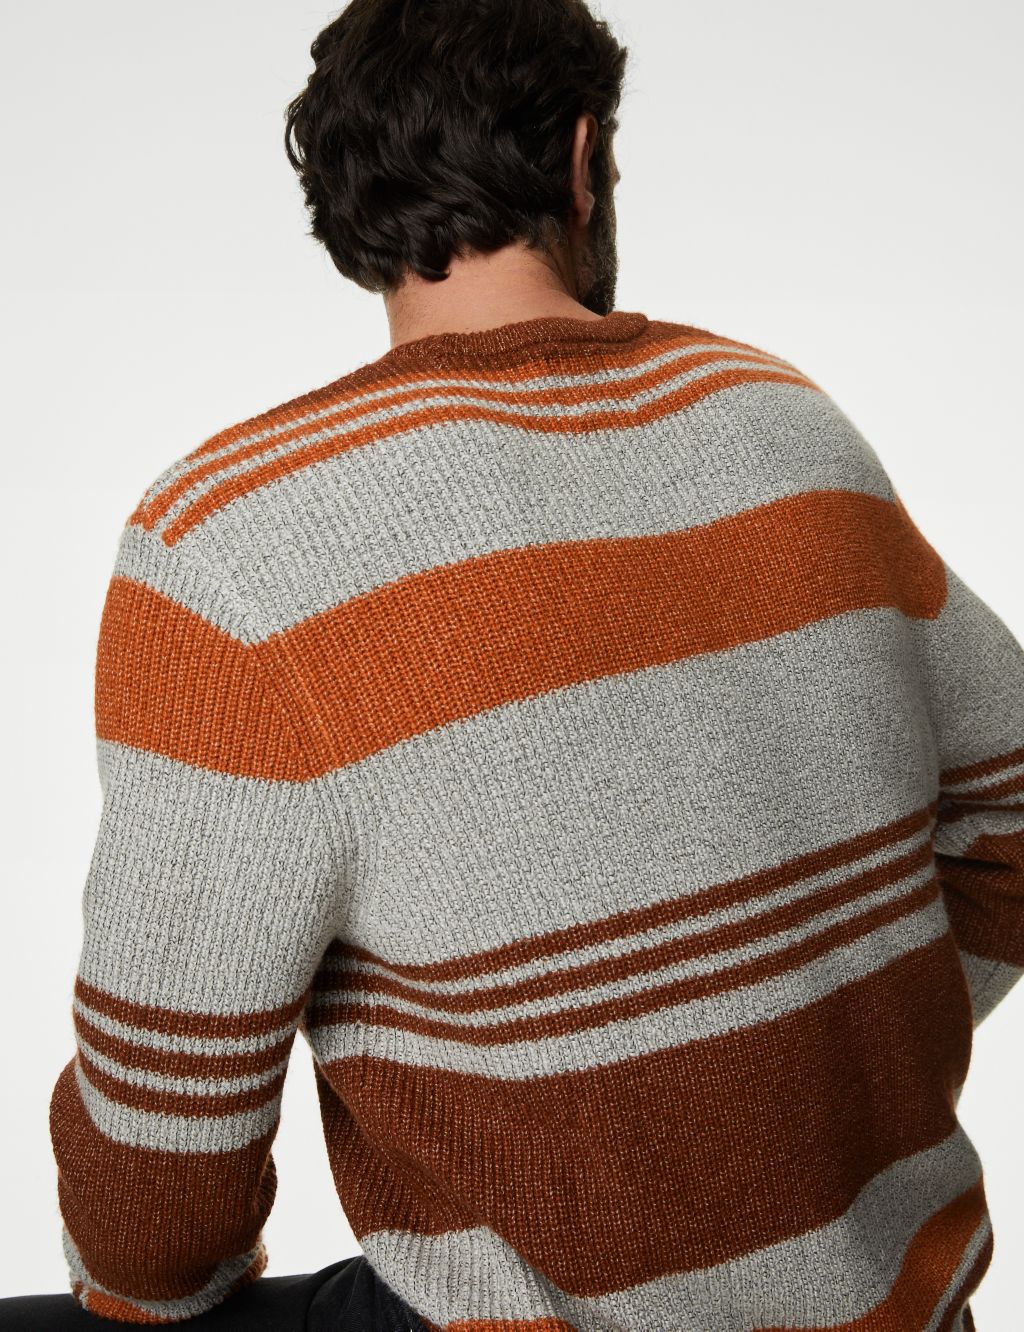 Supersoft Striped Chunky Crew Neck Jumper image 1